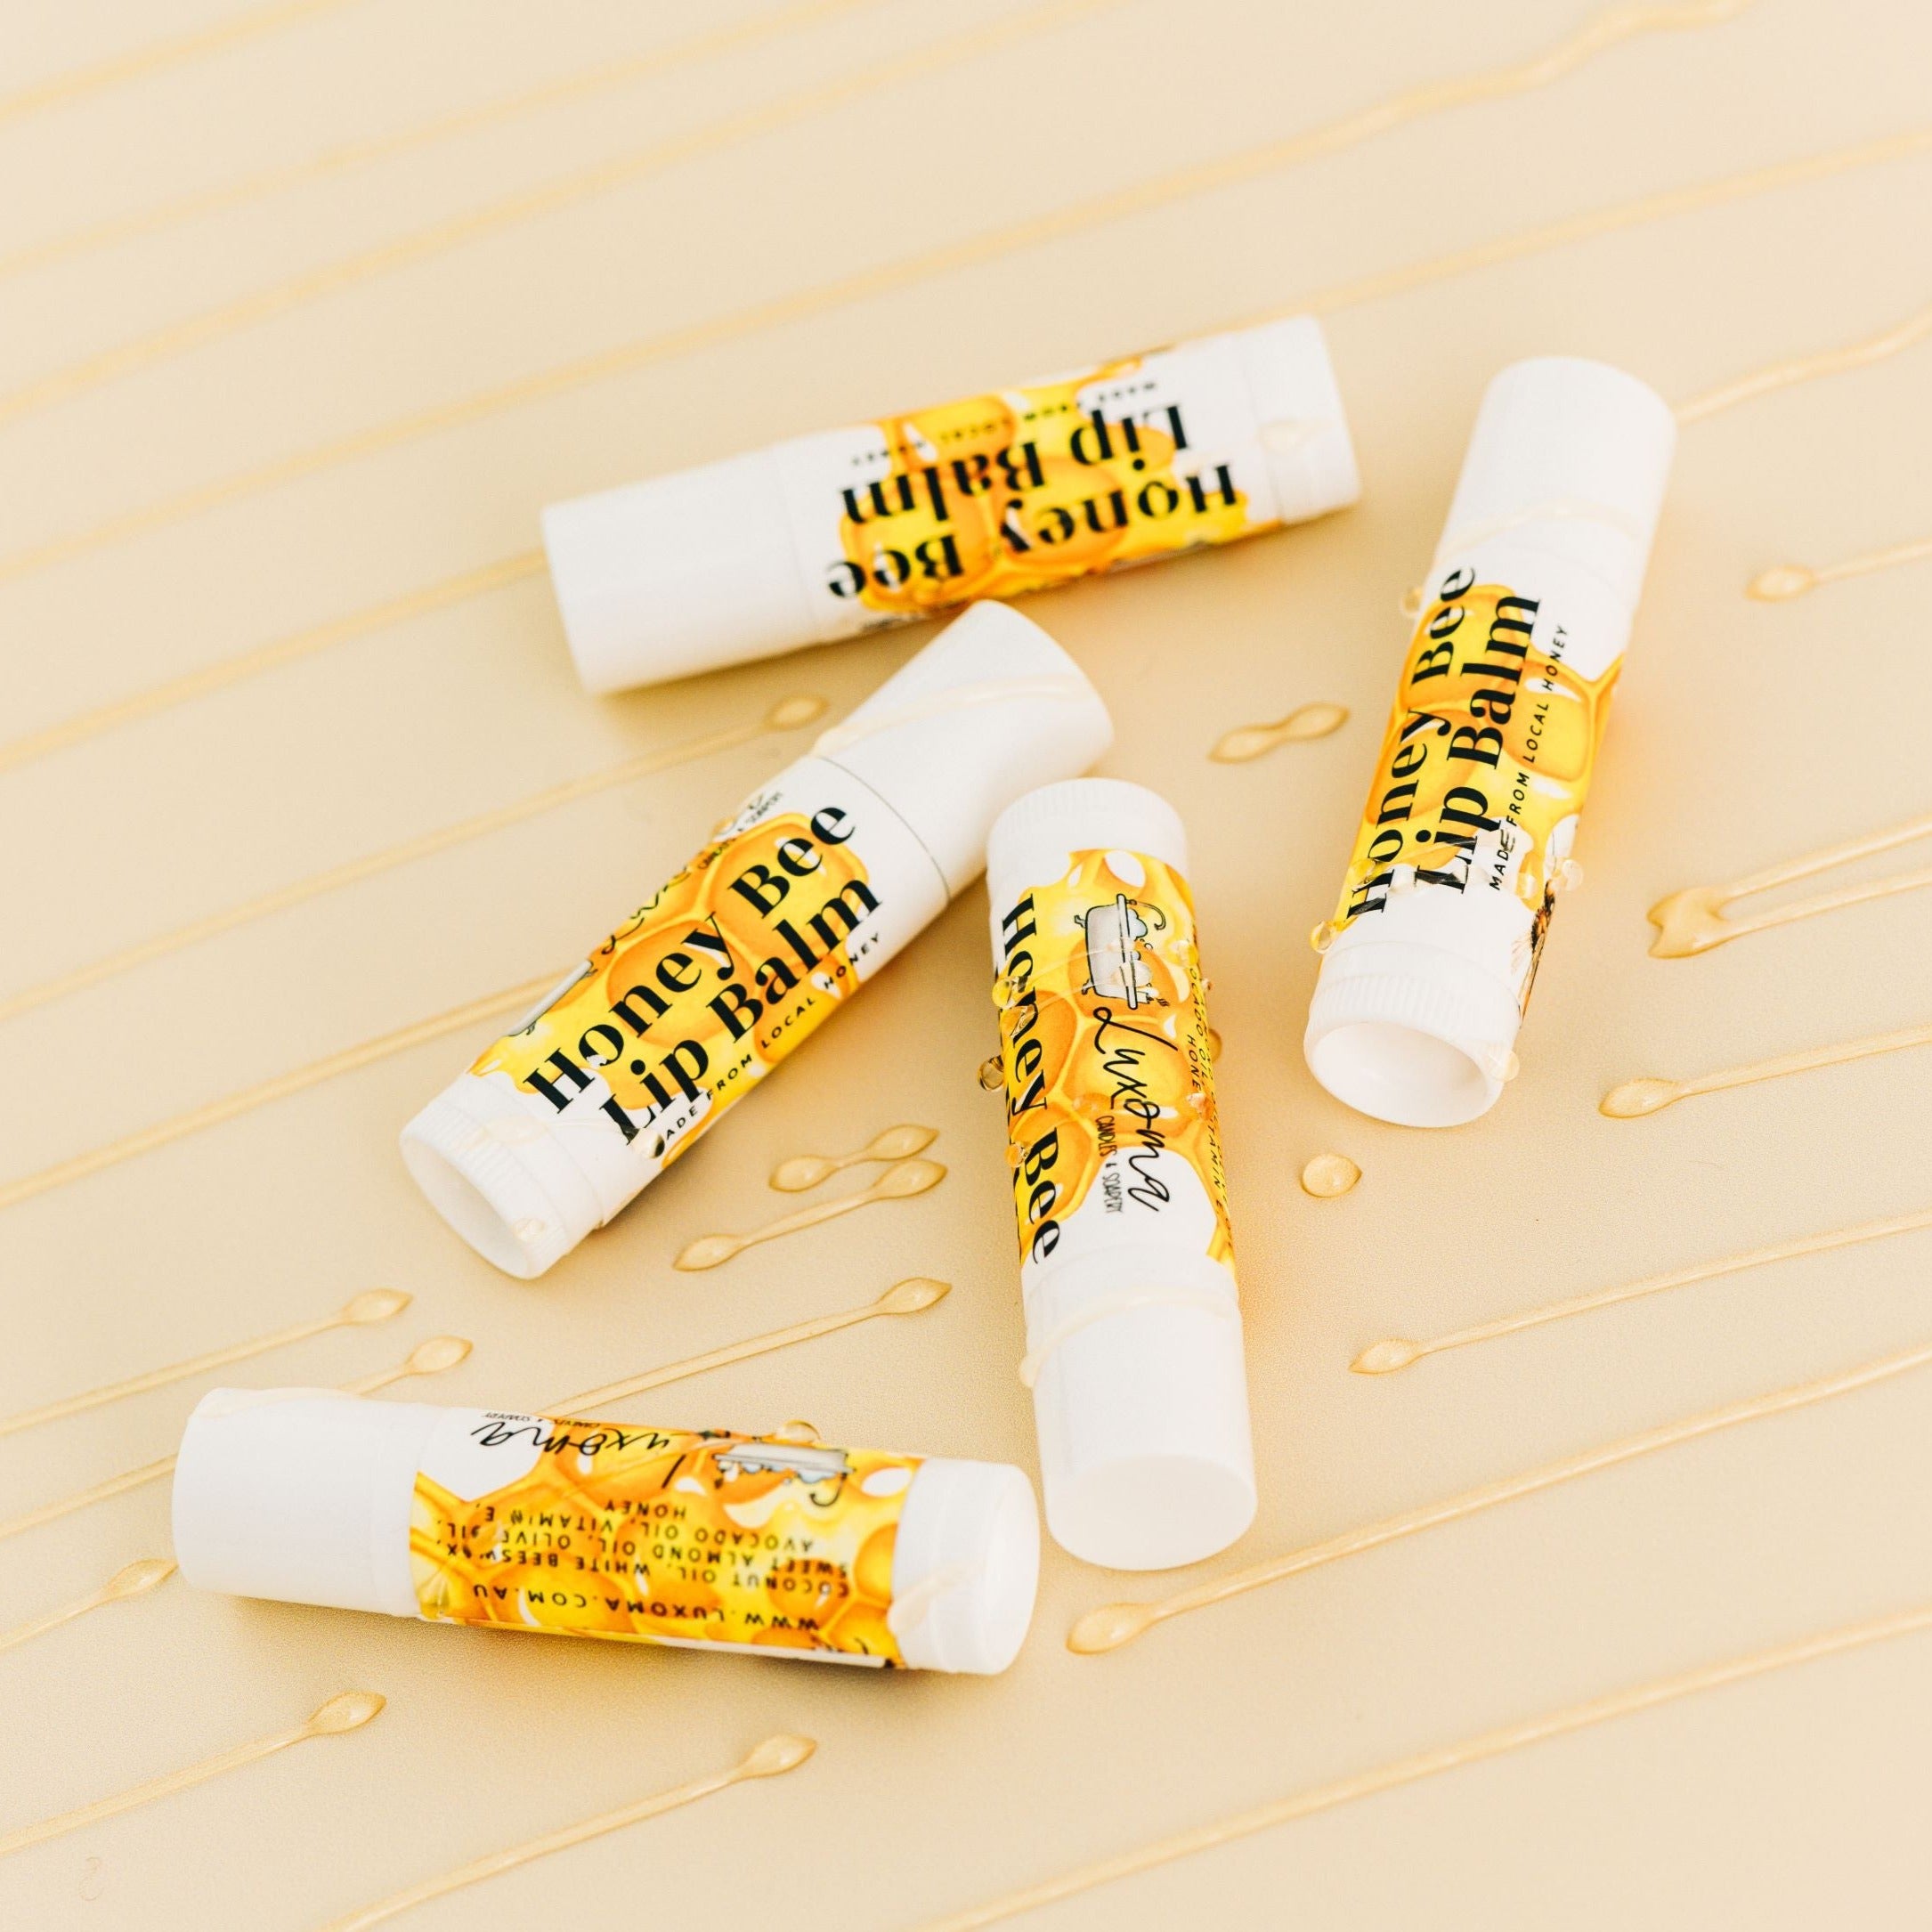 Honey Lip Balms on yellow desk with Honey drizzled over them